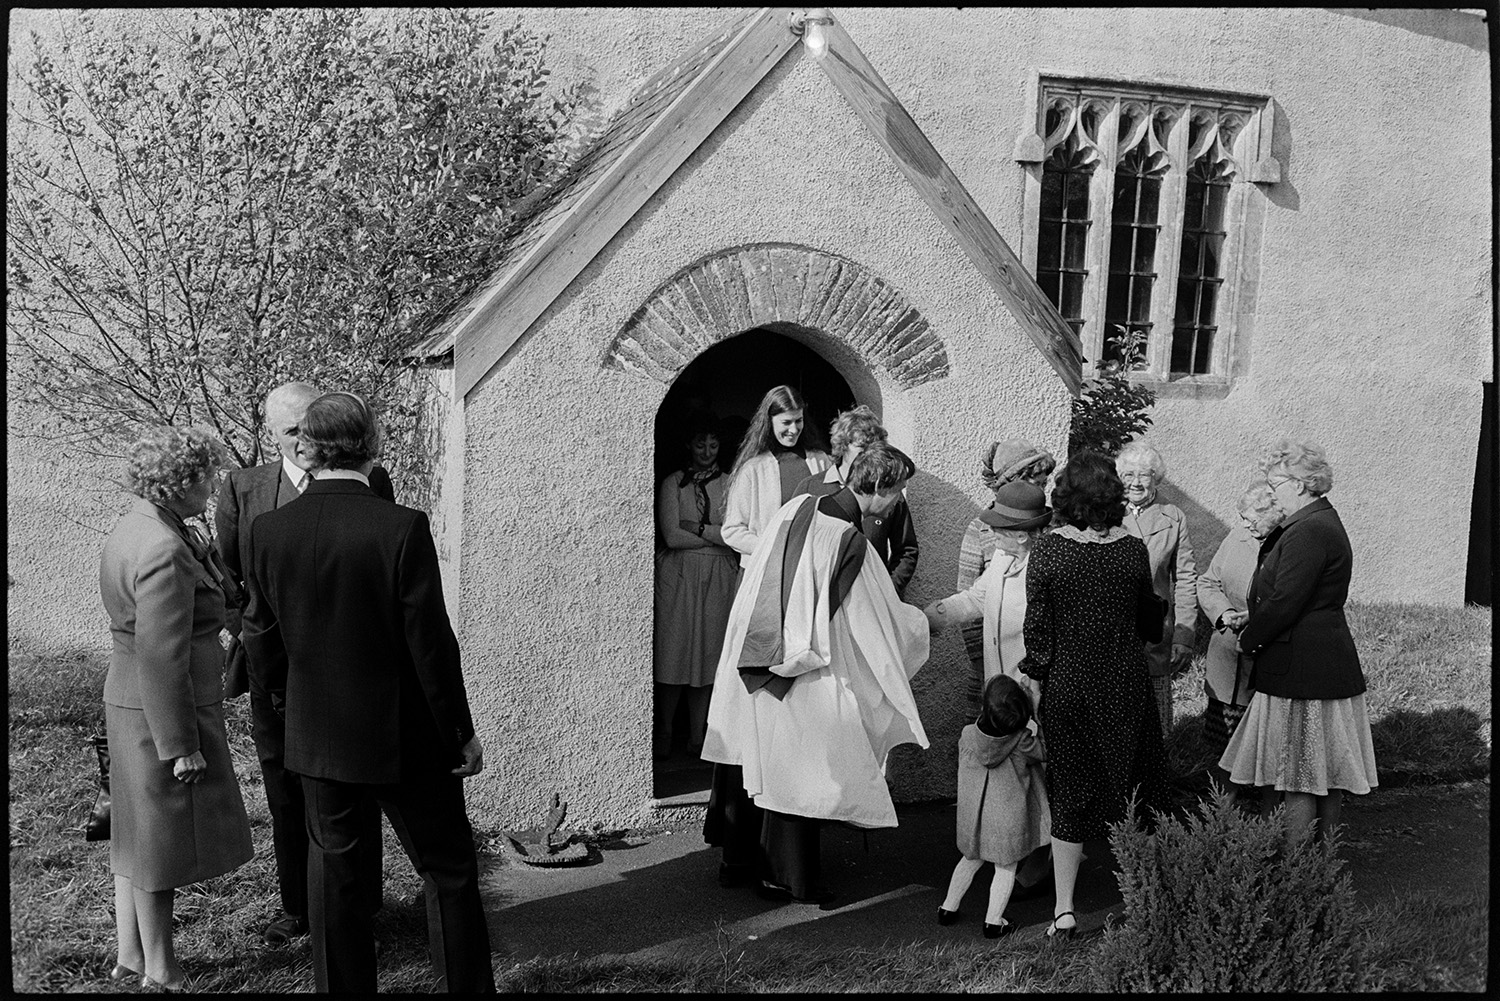 People coming out of church vicar saying hello and goodbye. Clothes.
[Reverend Jeremy Bell shaking hands and talking to members of the congregation, in front of the porch of the Church of St. Peter, Dowland, as they leave the church after the Harvest Festival. The detail of the window to the right of the porch can be seen.]